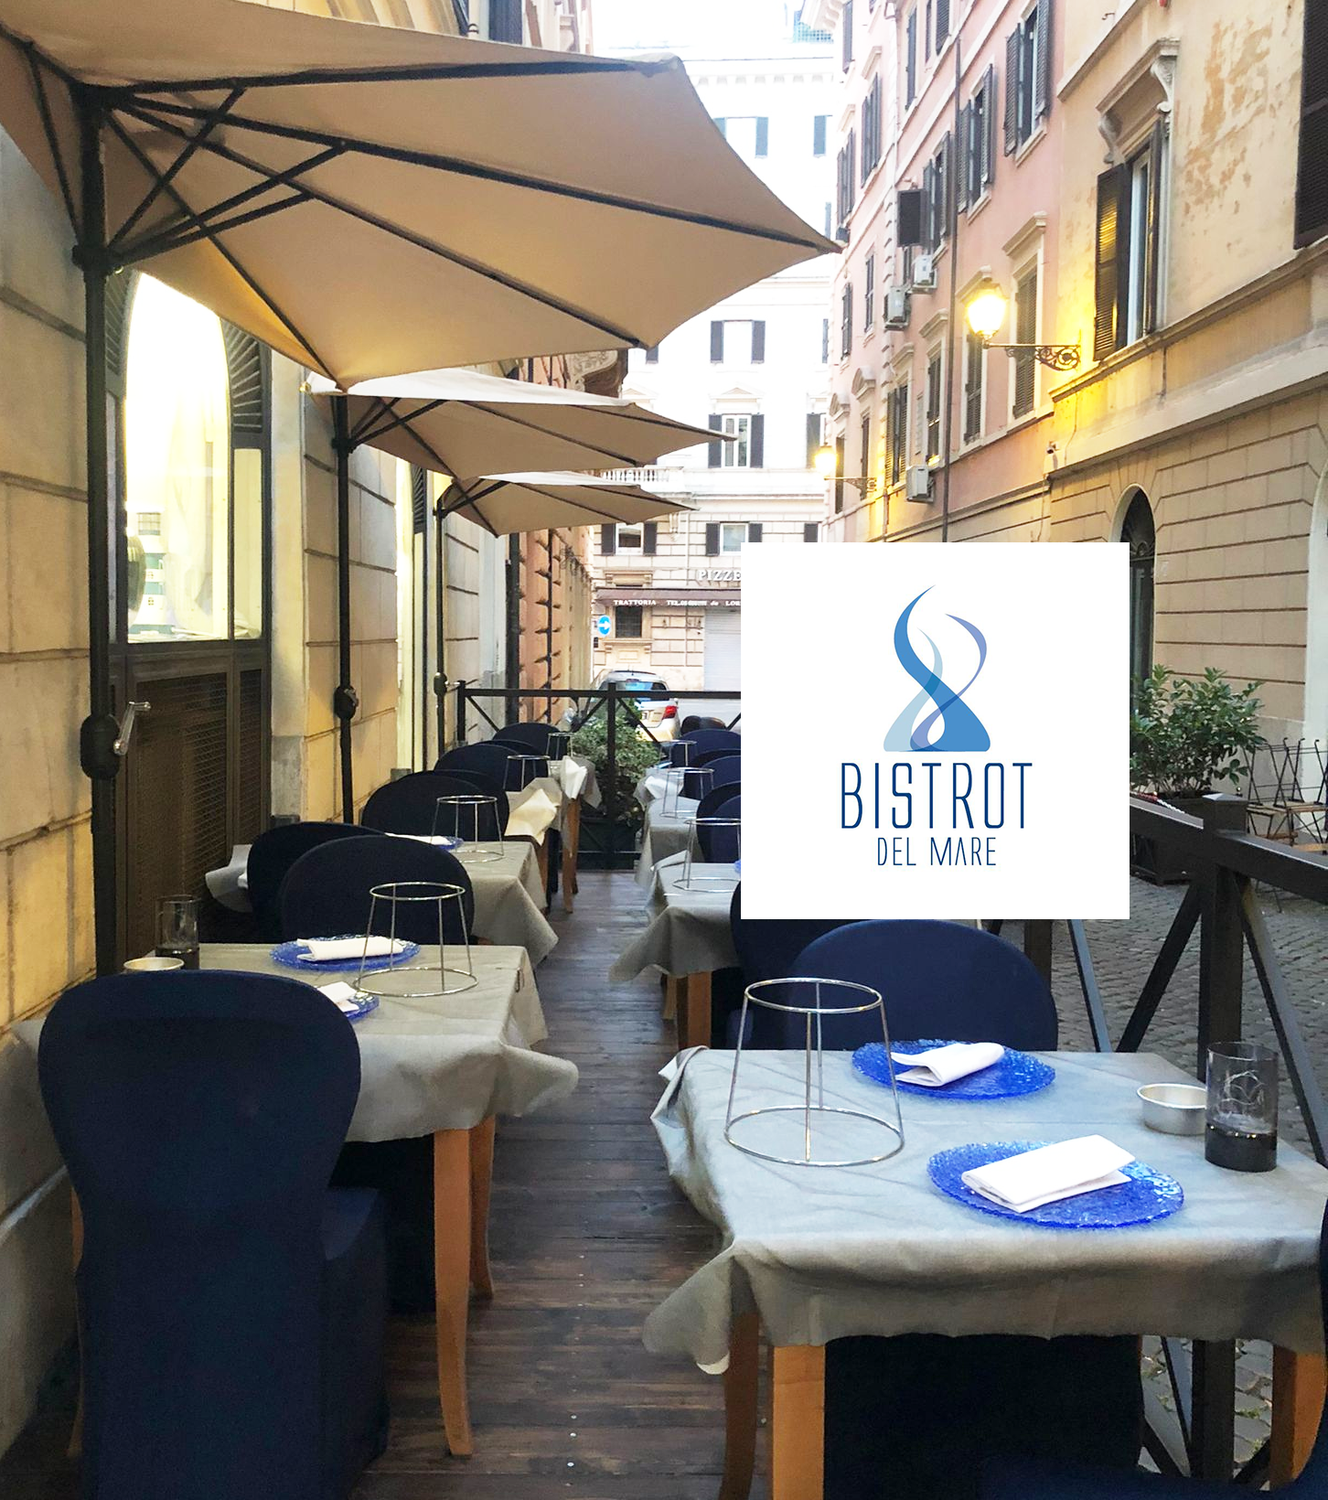 The best seafood Chef in Rome opens new Bistro in Fiumicino